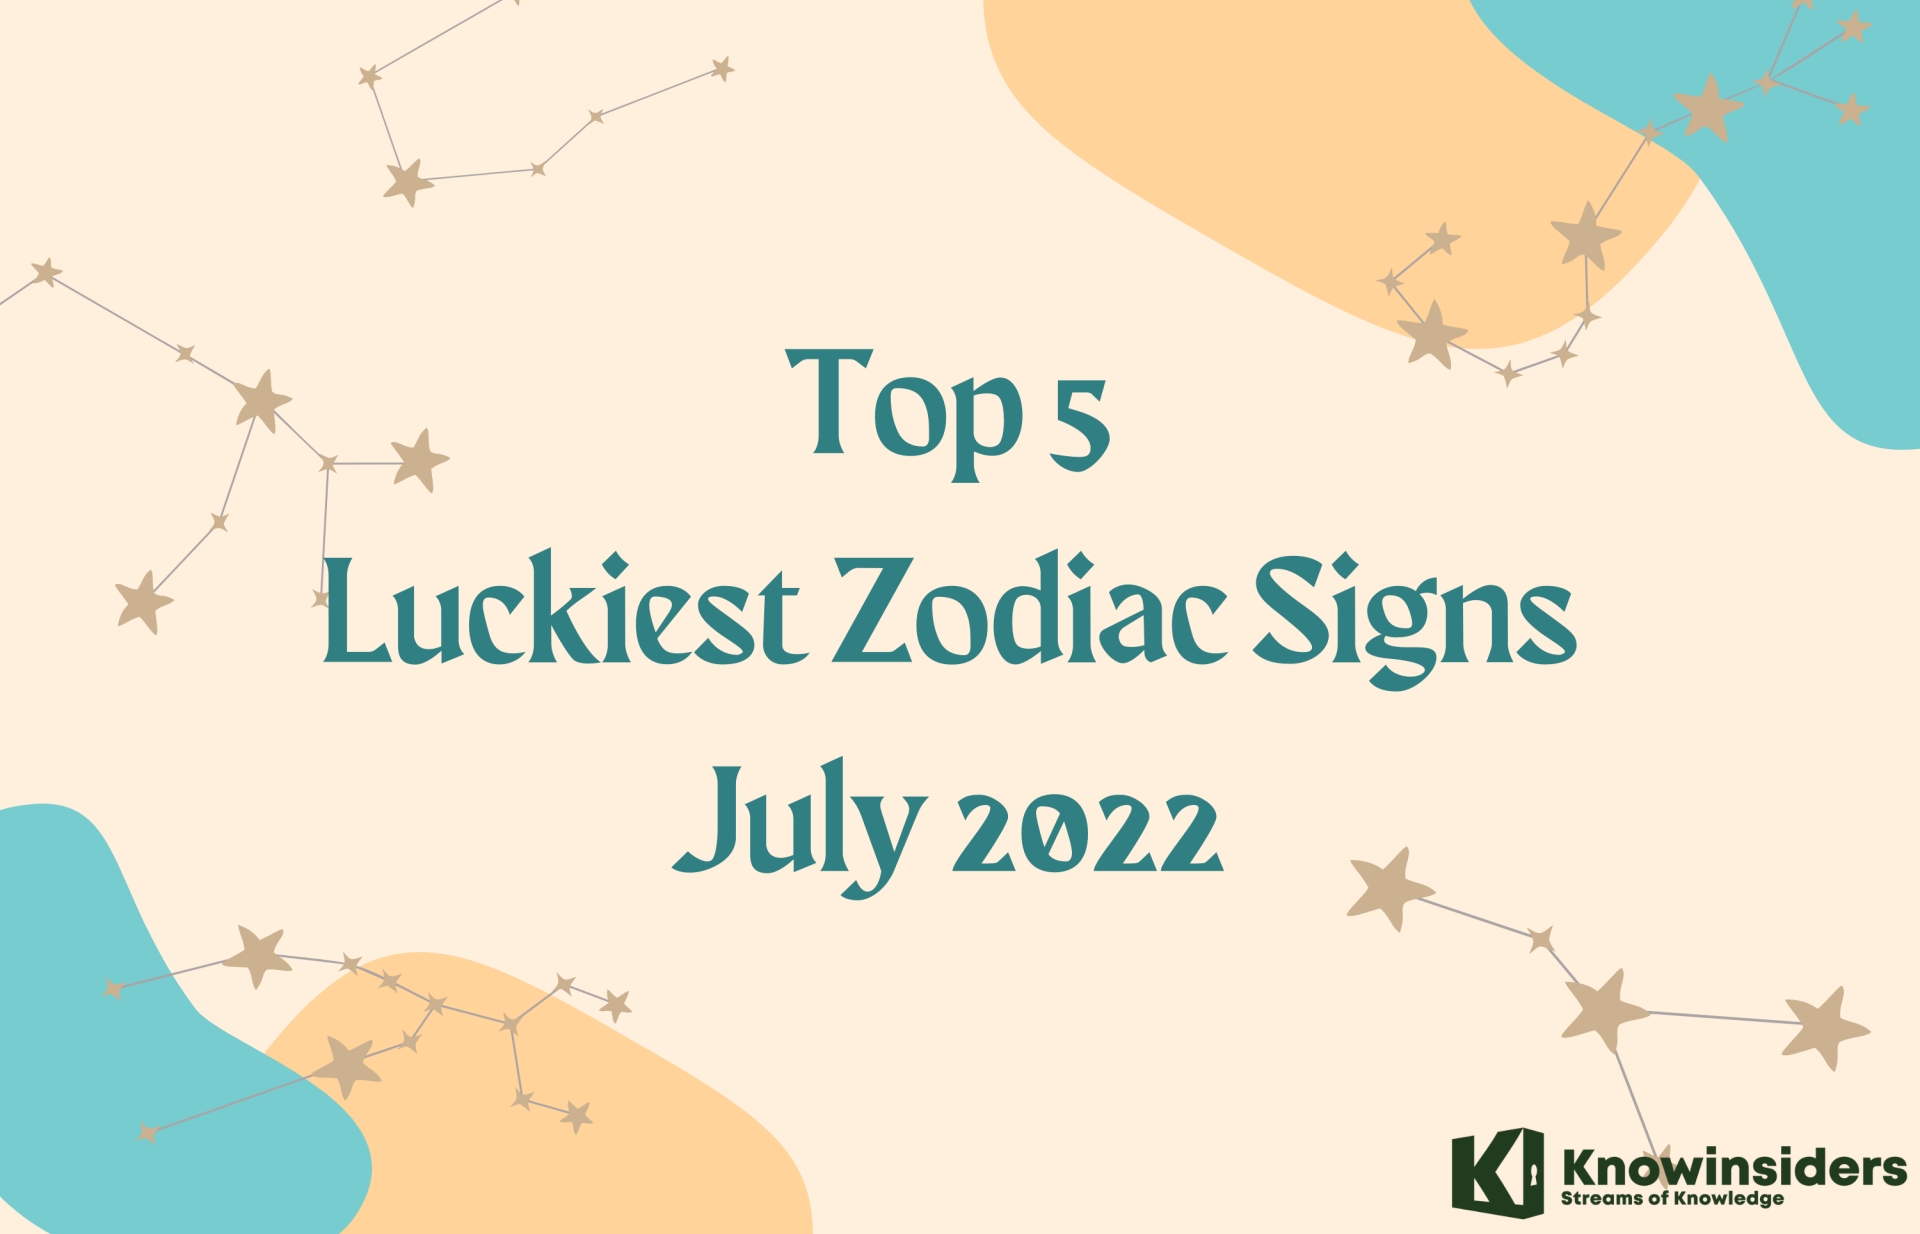 Top 5 Luckiest Zodiac Signs in July 2022 - According to Astrology